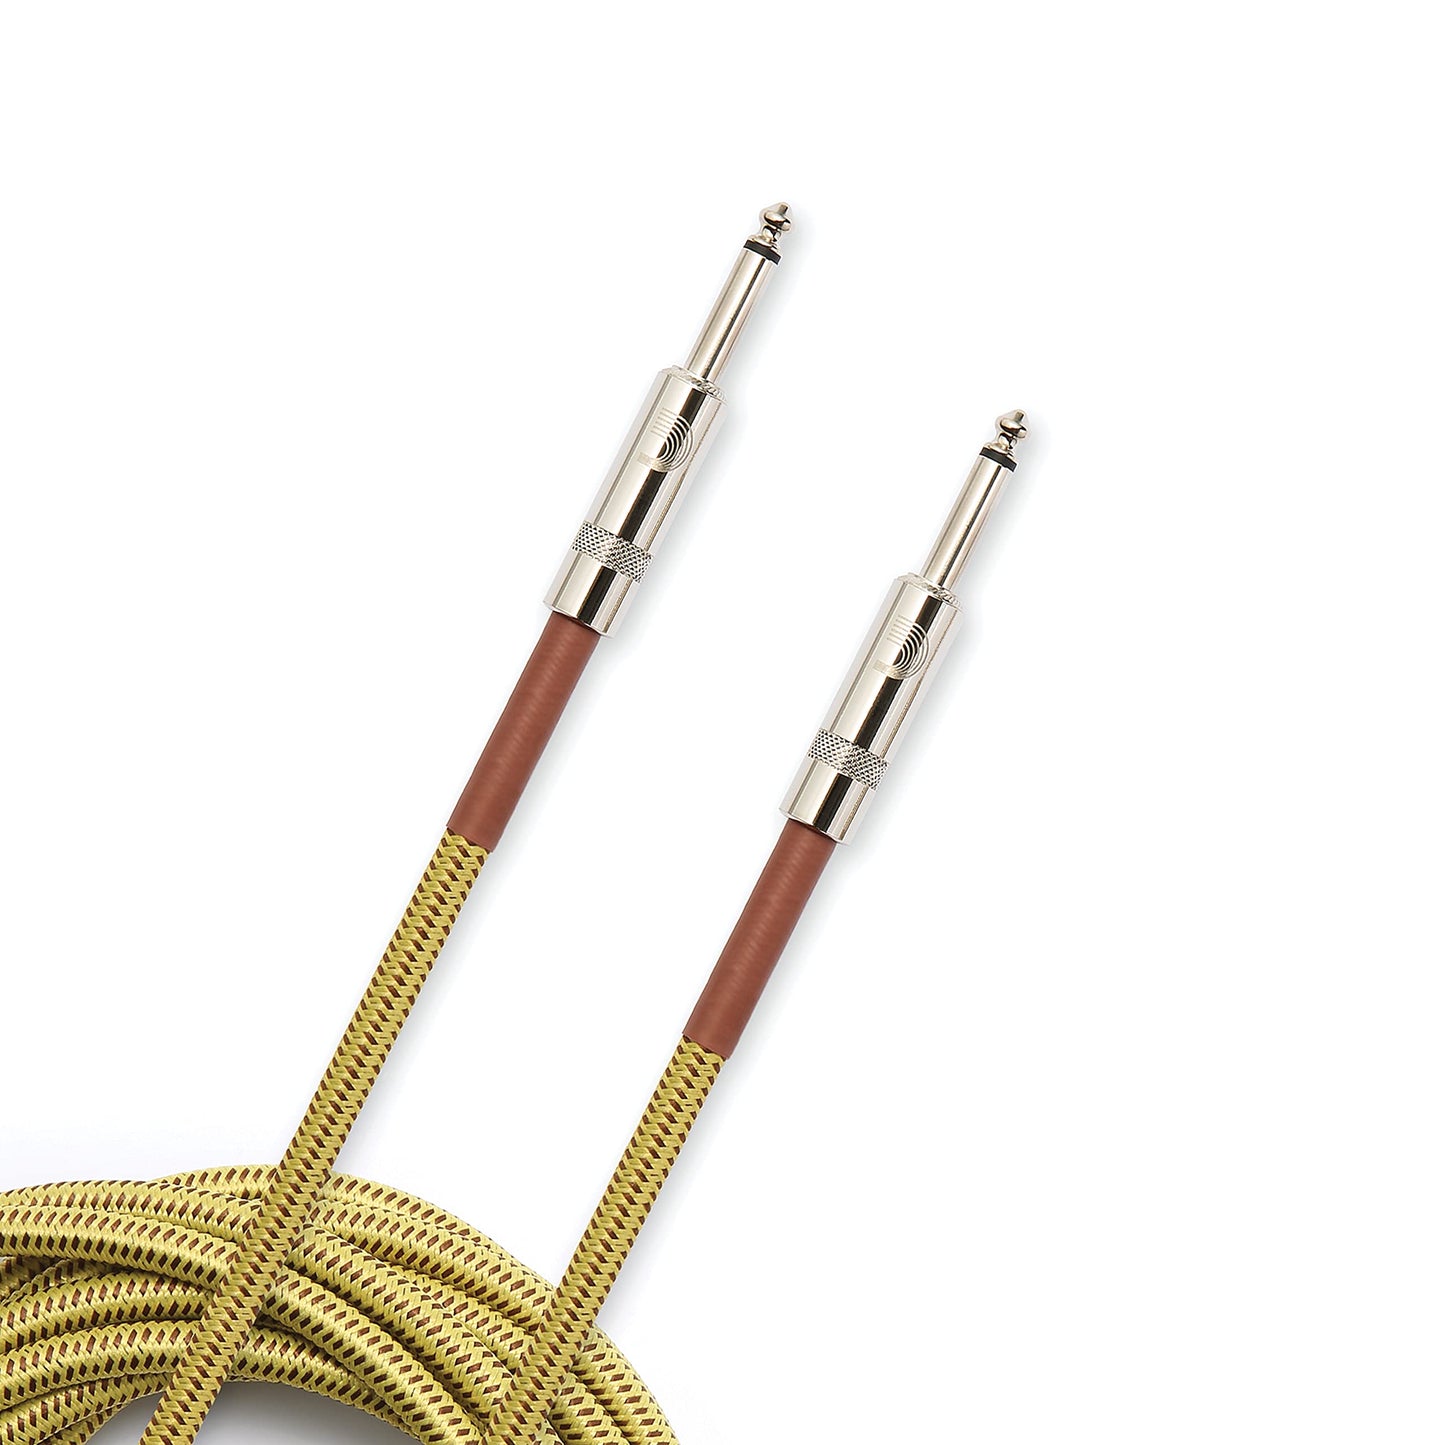 D'Addario Braided Instrument Cable Tweed, 15ft. PW-BG-15TW